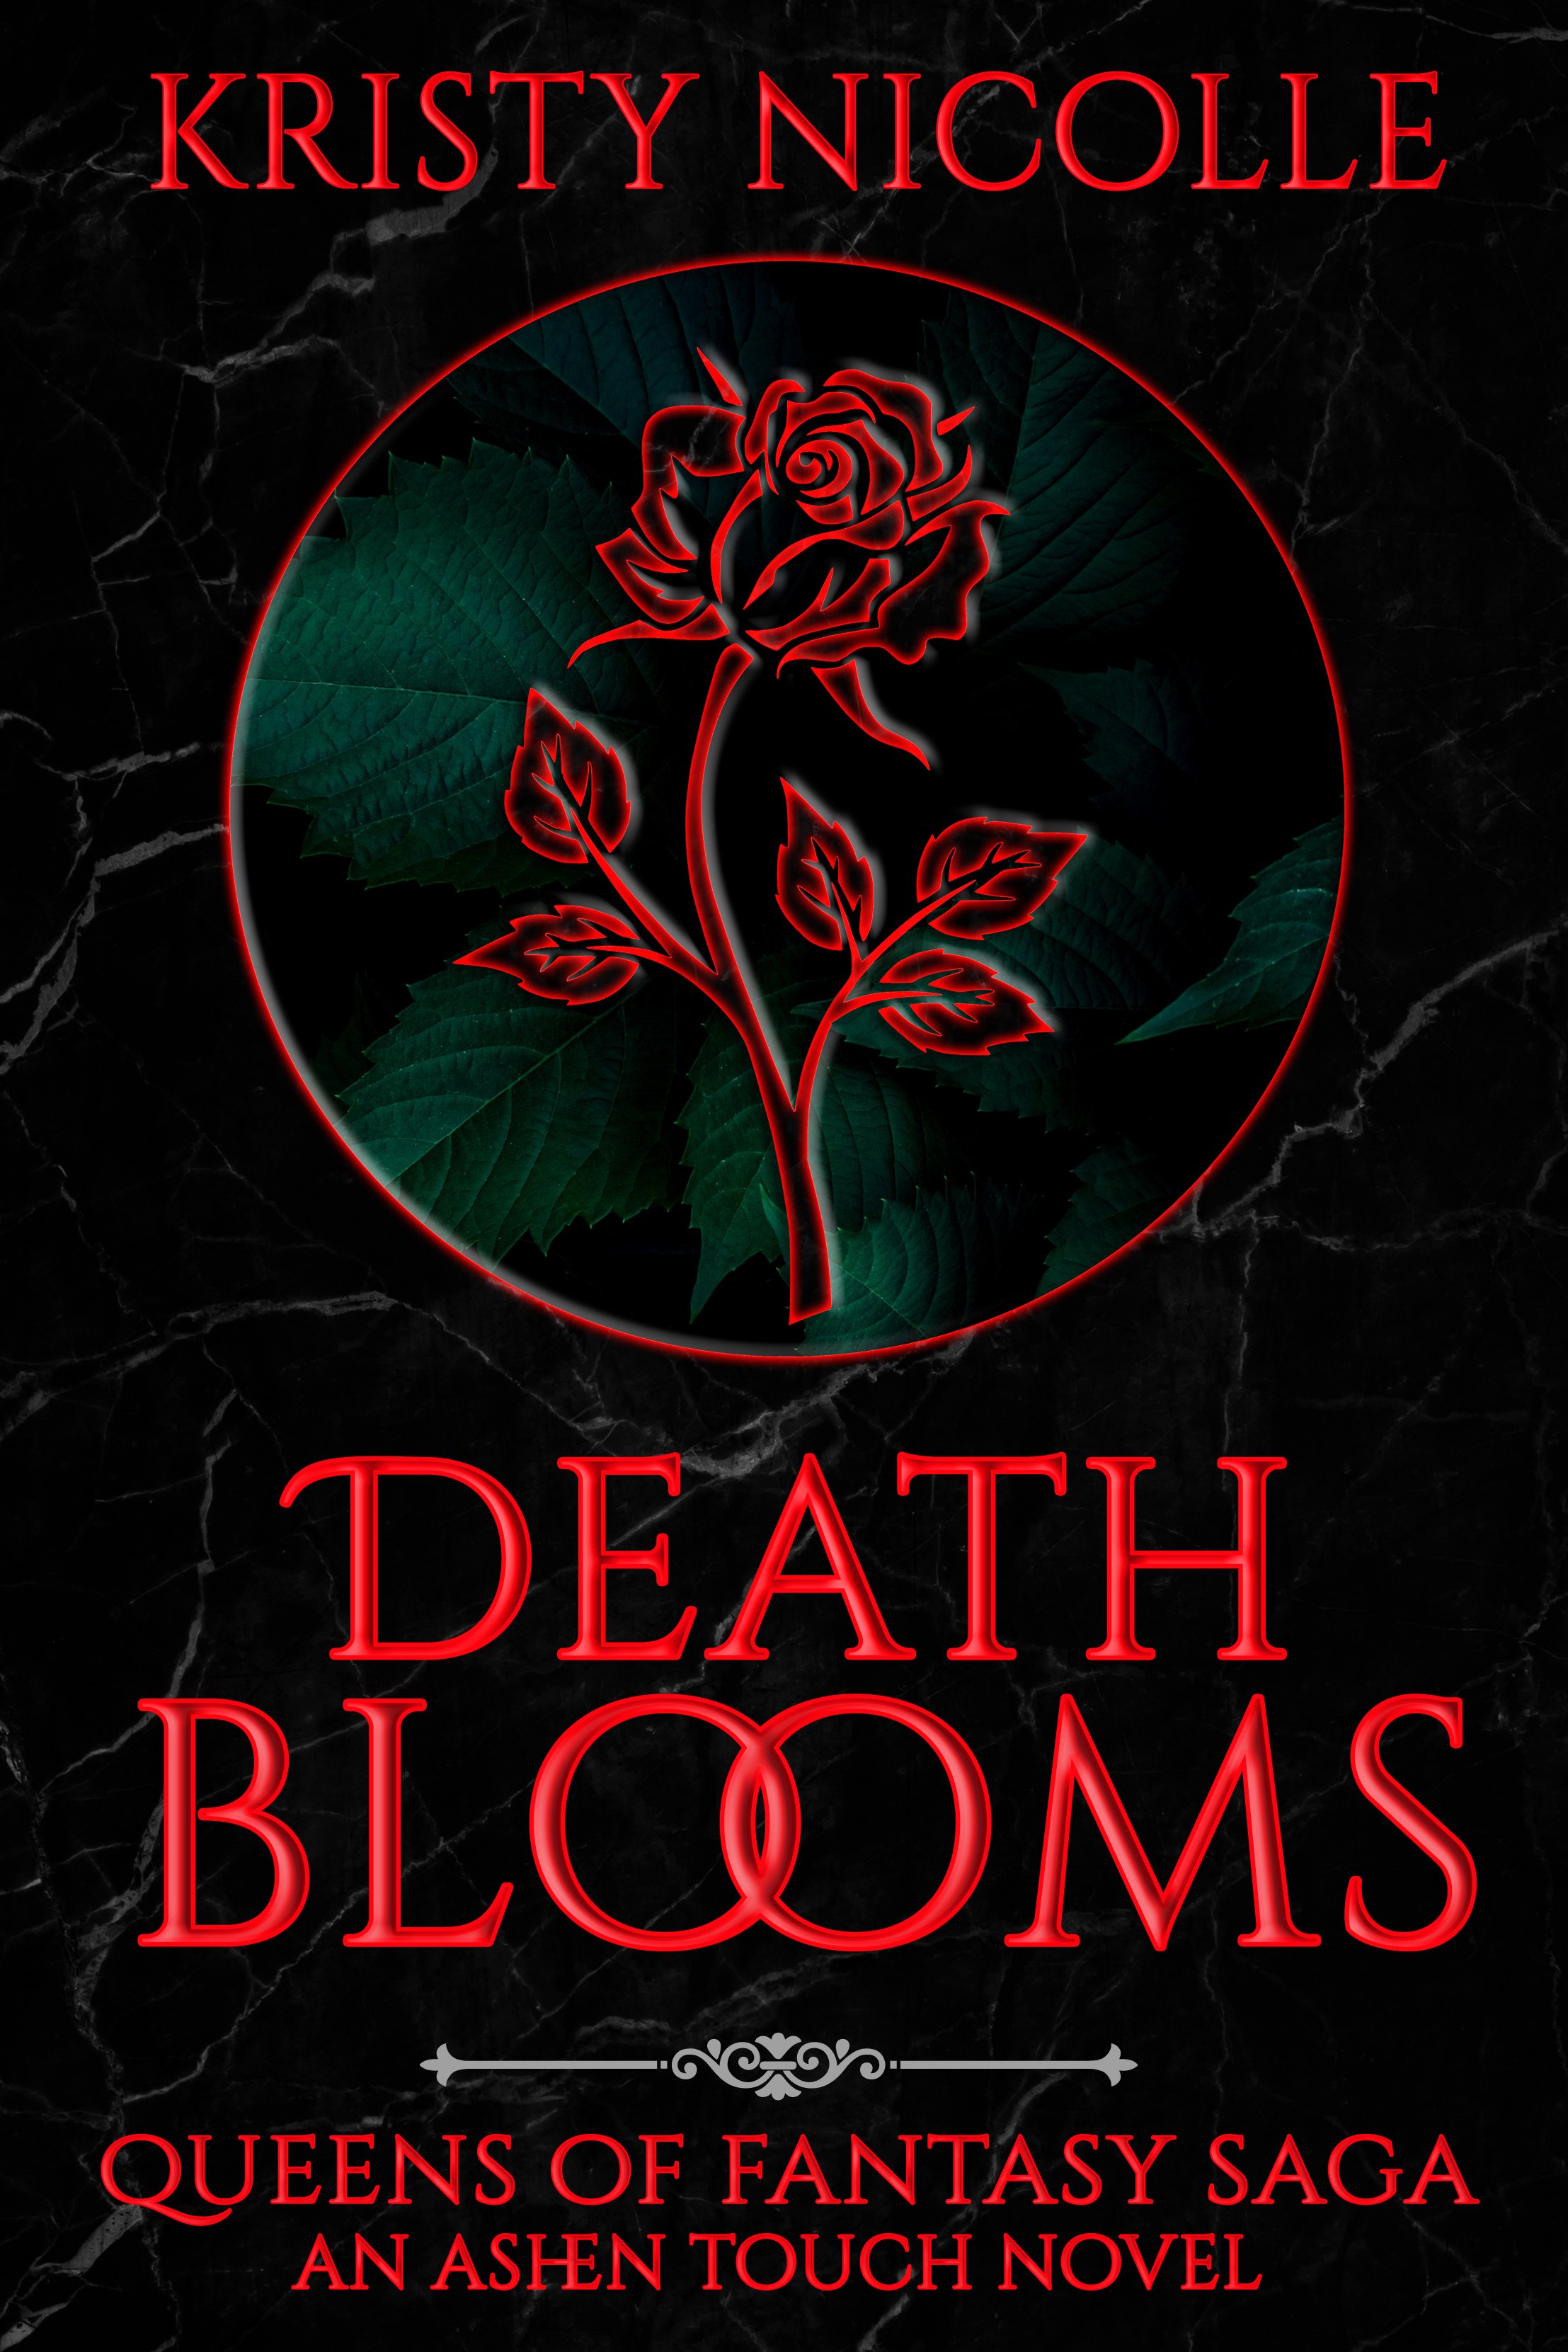 DEATH BLOOMS eCOVER.jpg